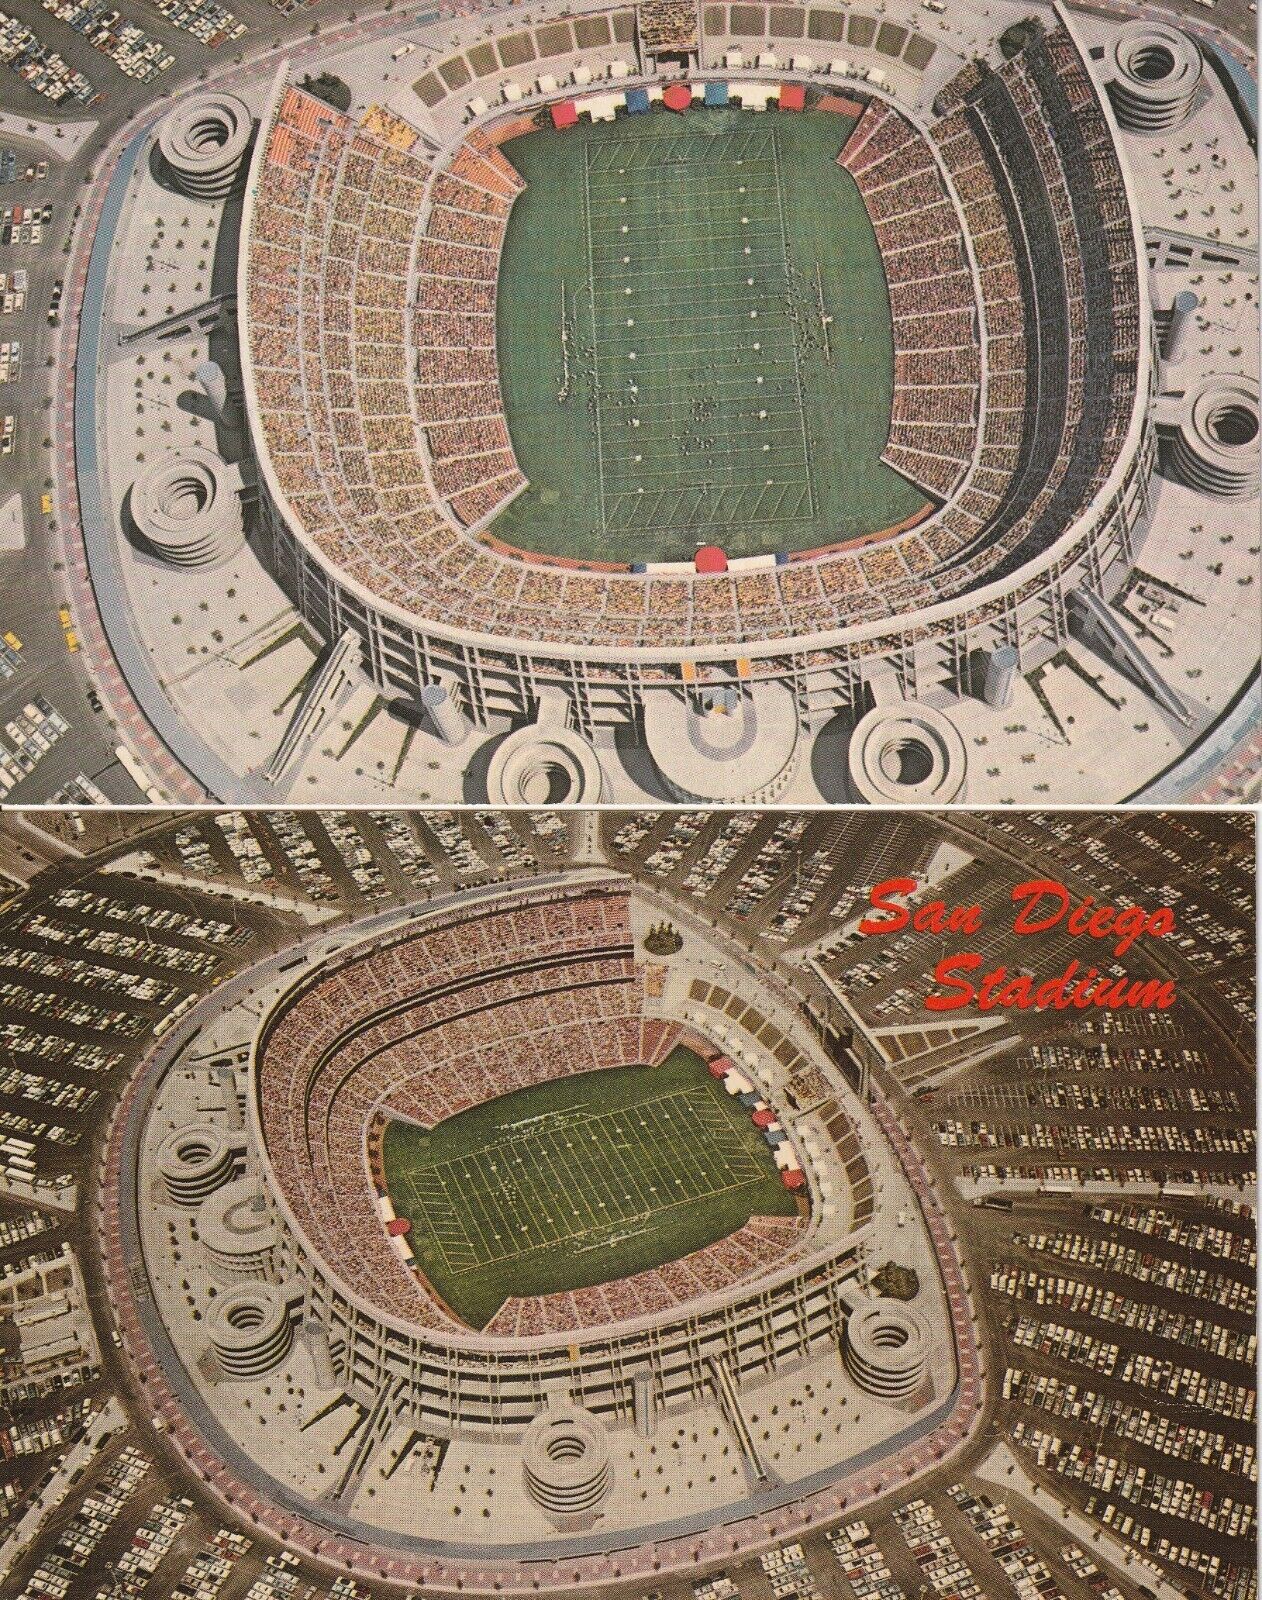 (2) San Diego Stadium Postcards - Former Home of the Padres, Chargers, Aztecs #2